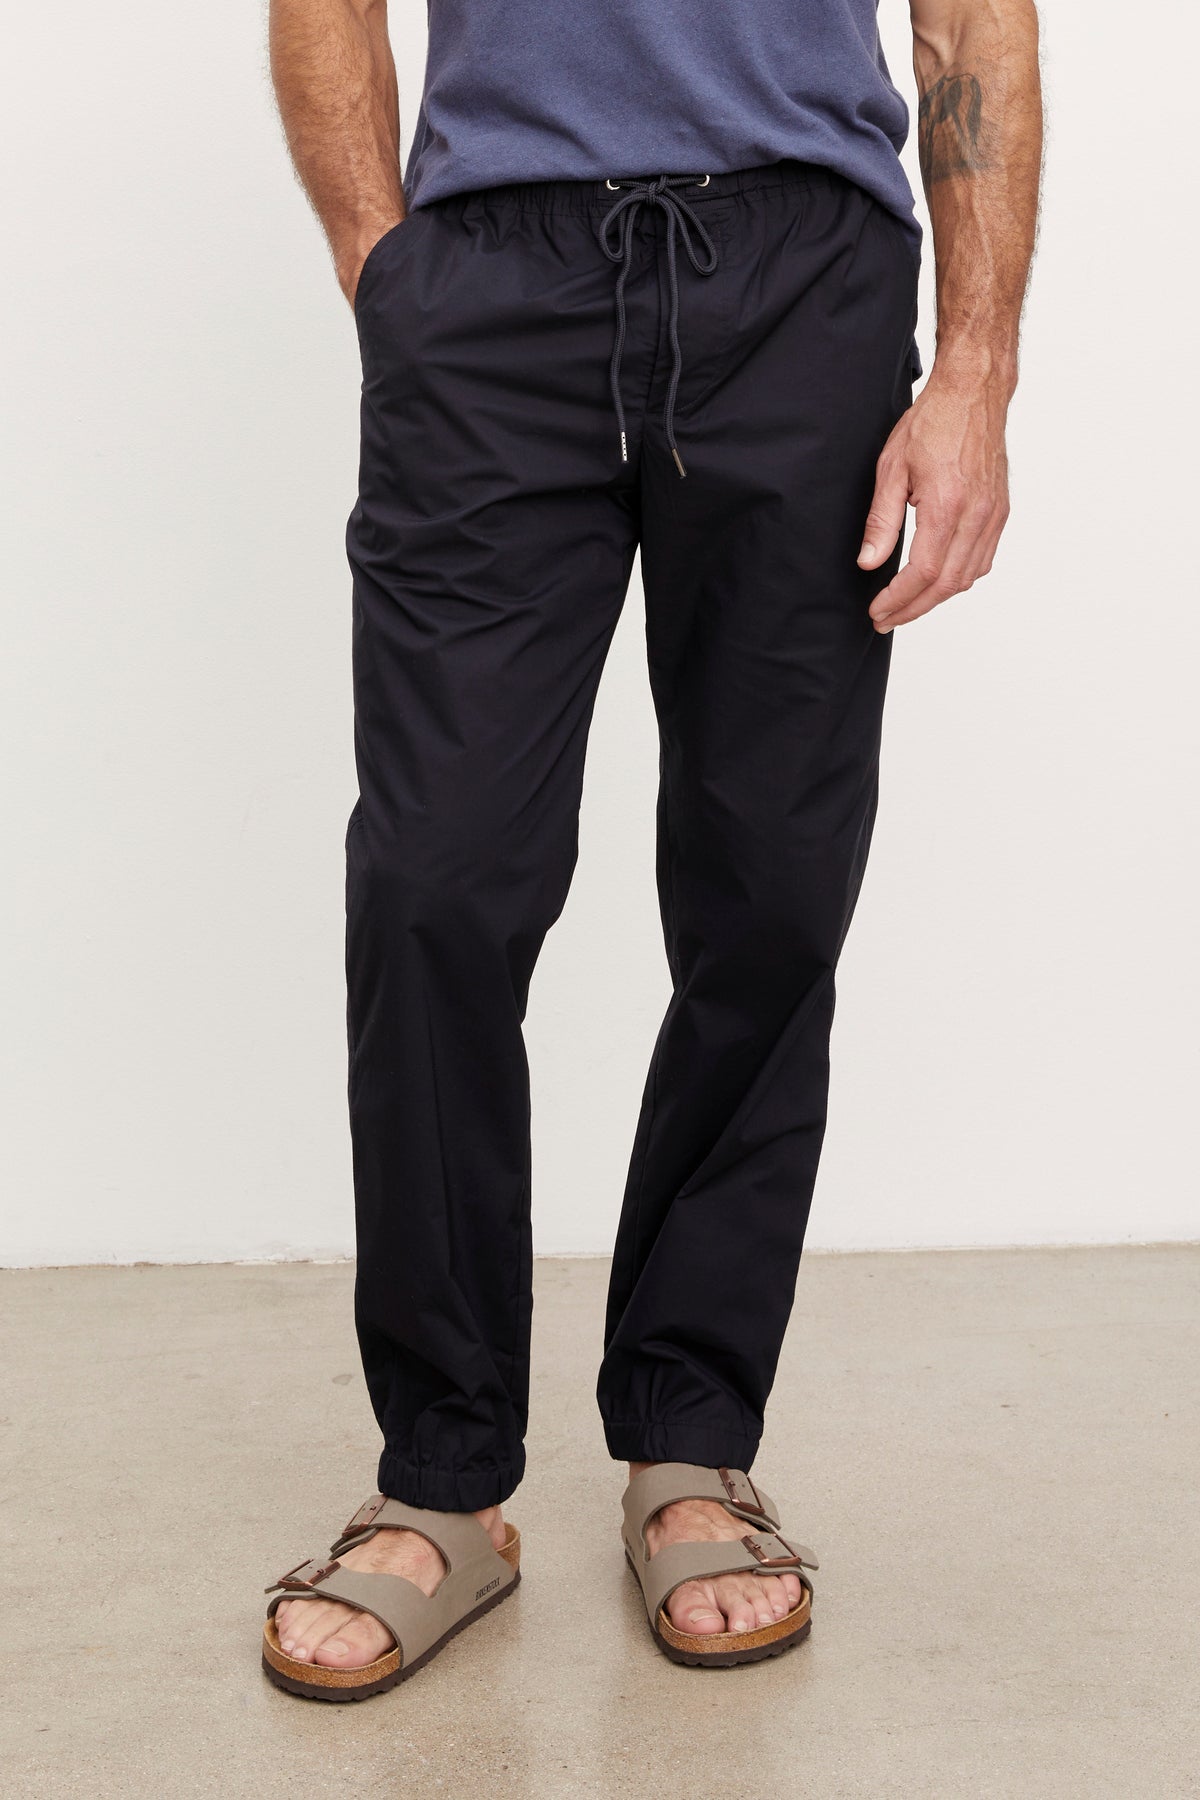   Man wearing Velvet by Graham & Spencer LAZARUS JOGGER and brown sandals, standing in a neutral pose, focusing on the lower body from waist down. 